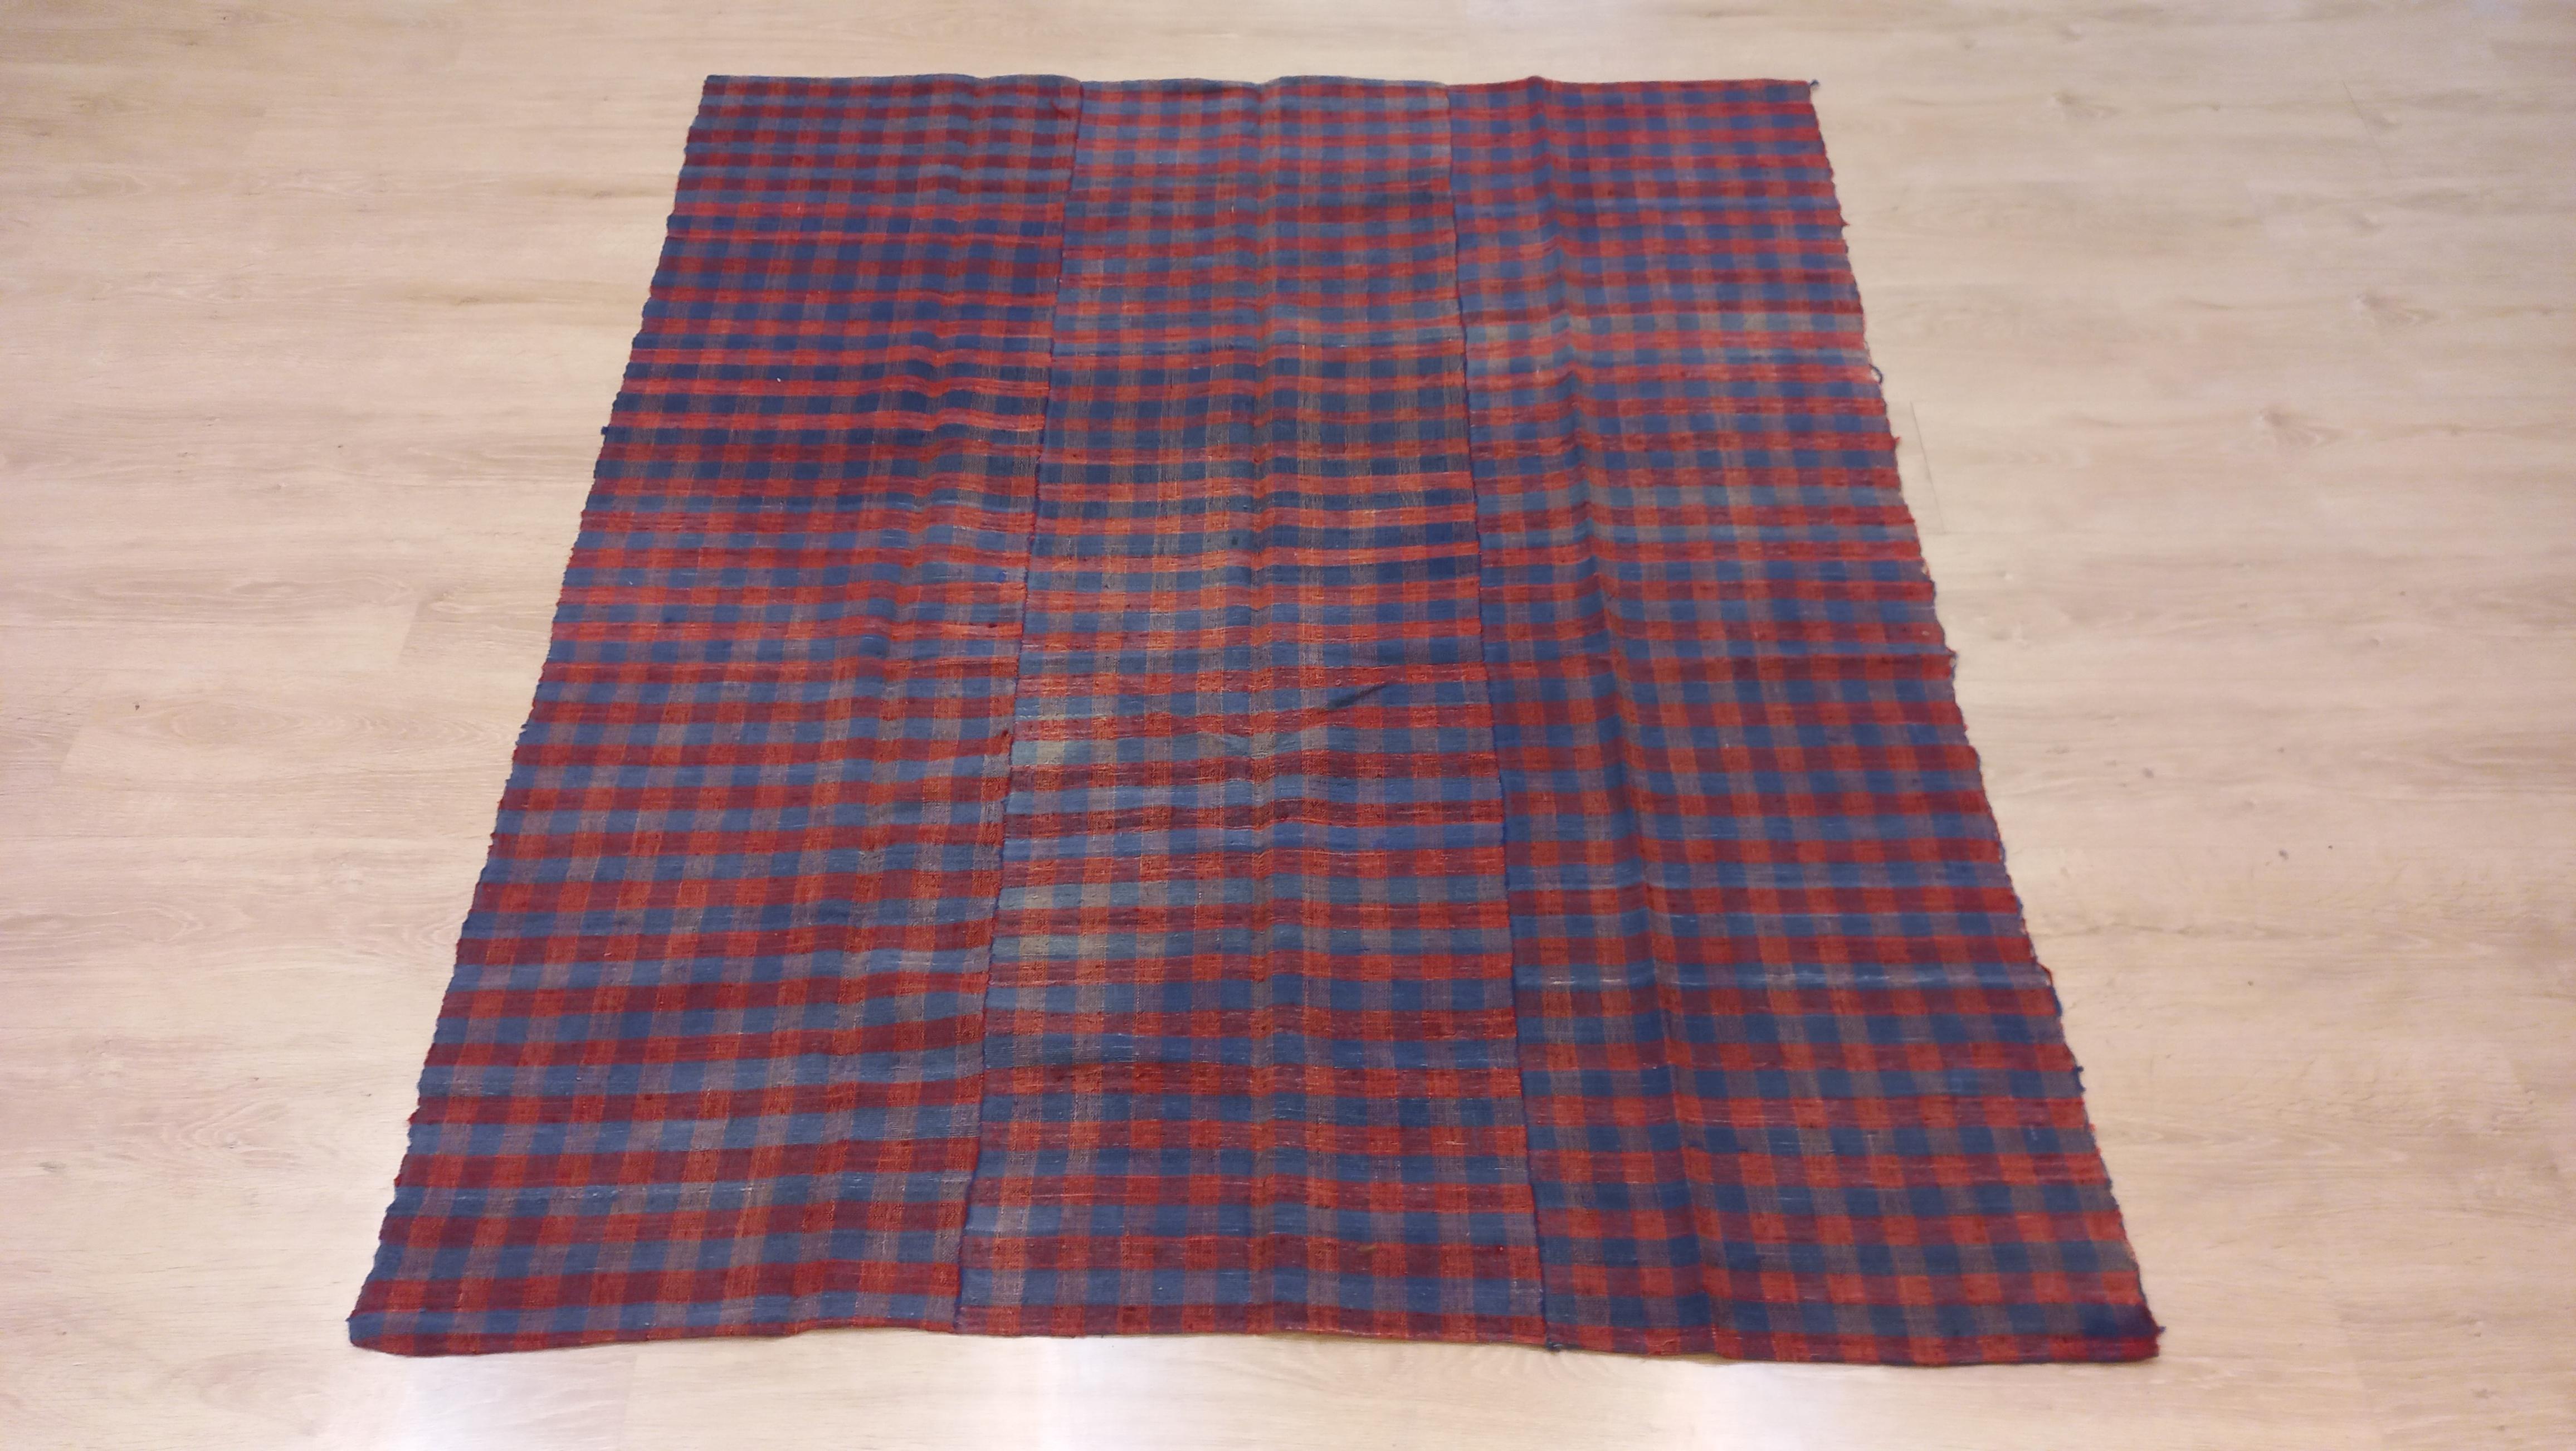 Turkish 4.5x5 ft Vintage Checkered Kilim in Red & Blue, Decorative Handmade Home Textile